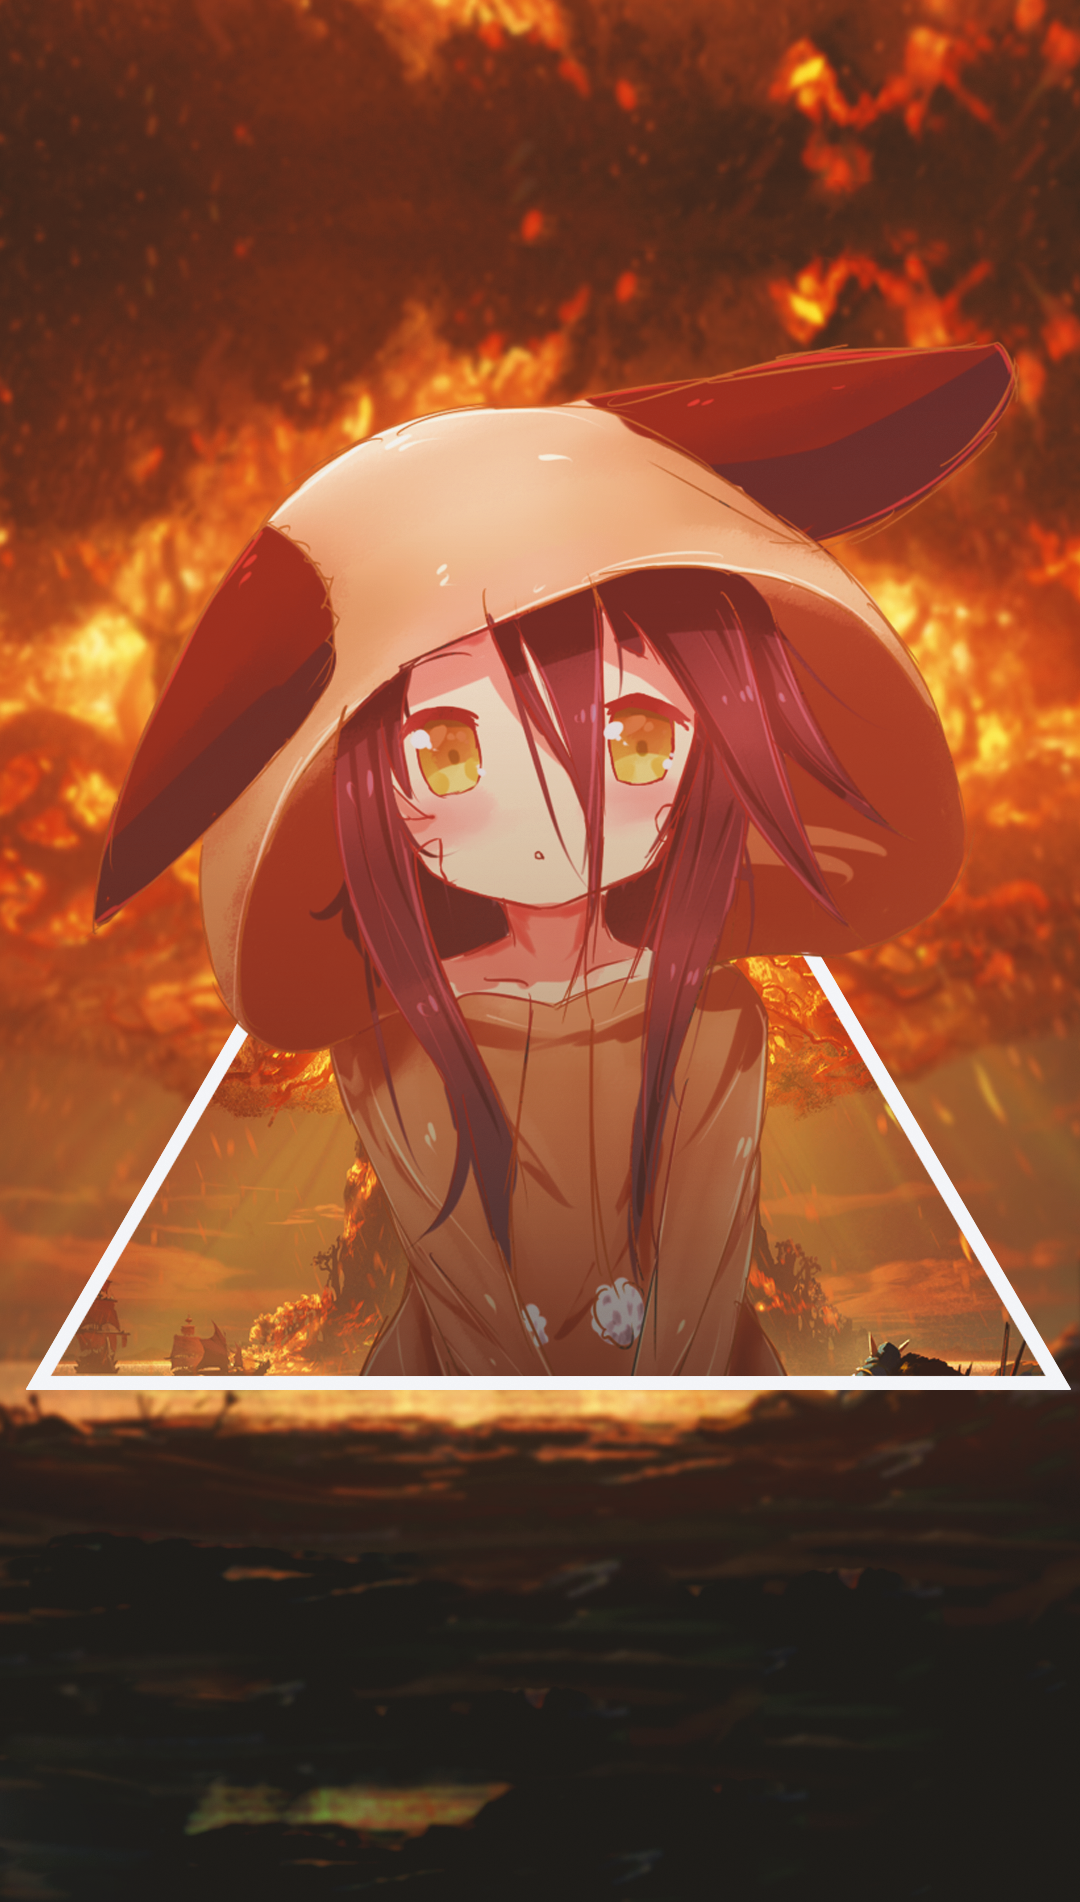 Anime 1080x1902 anime anime girls picture-in-picture No Game No Life Shuvi triangle yellow eyes